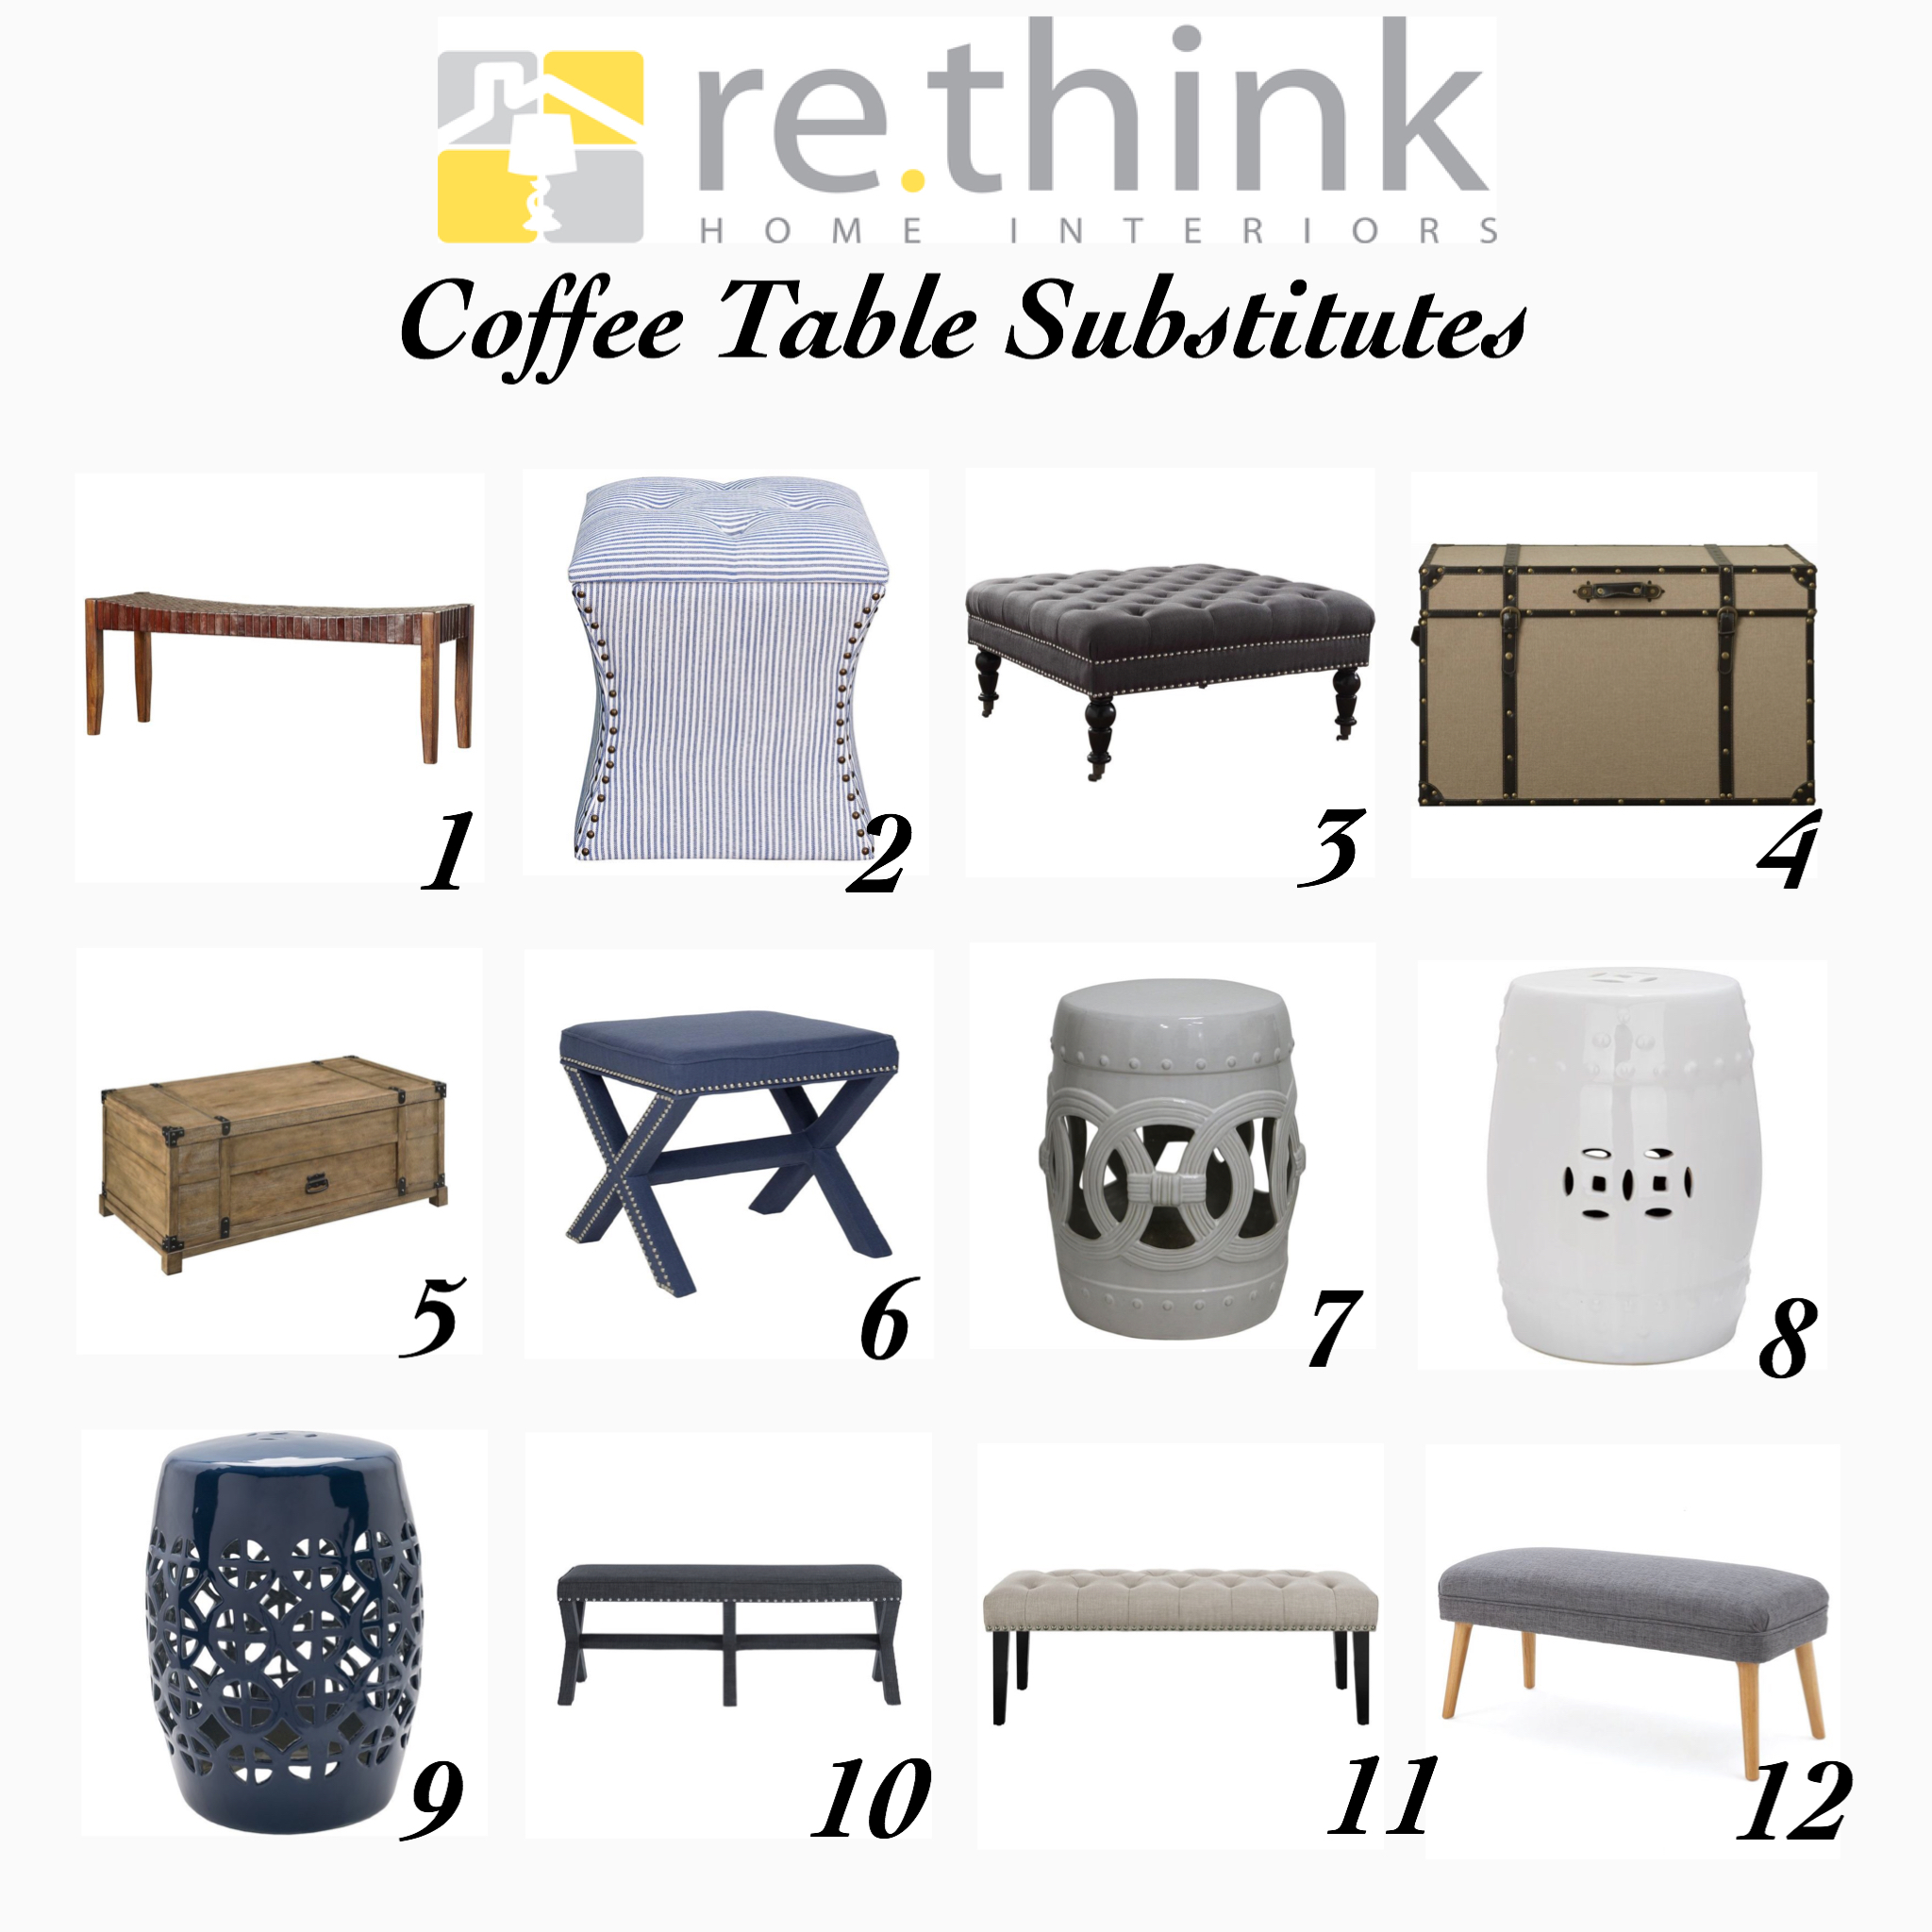 Coffee table substitutes